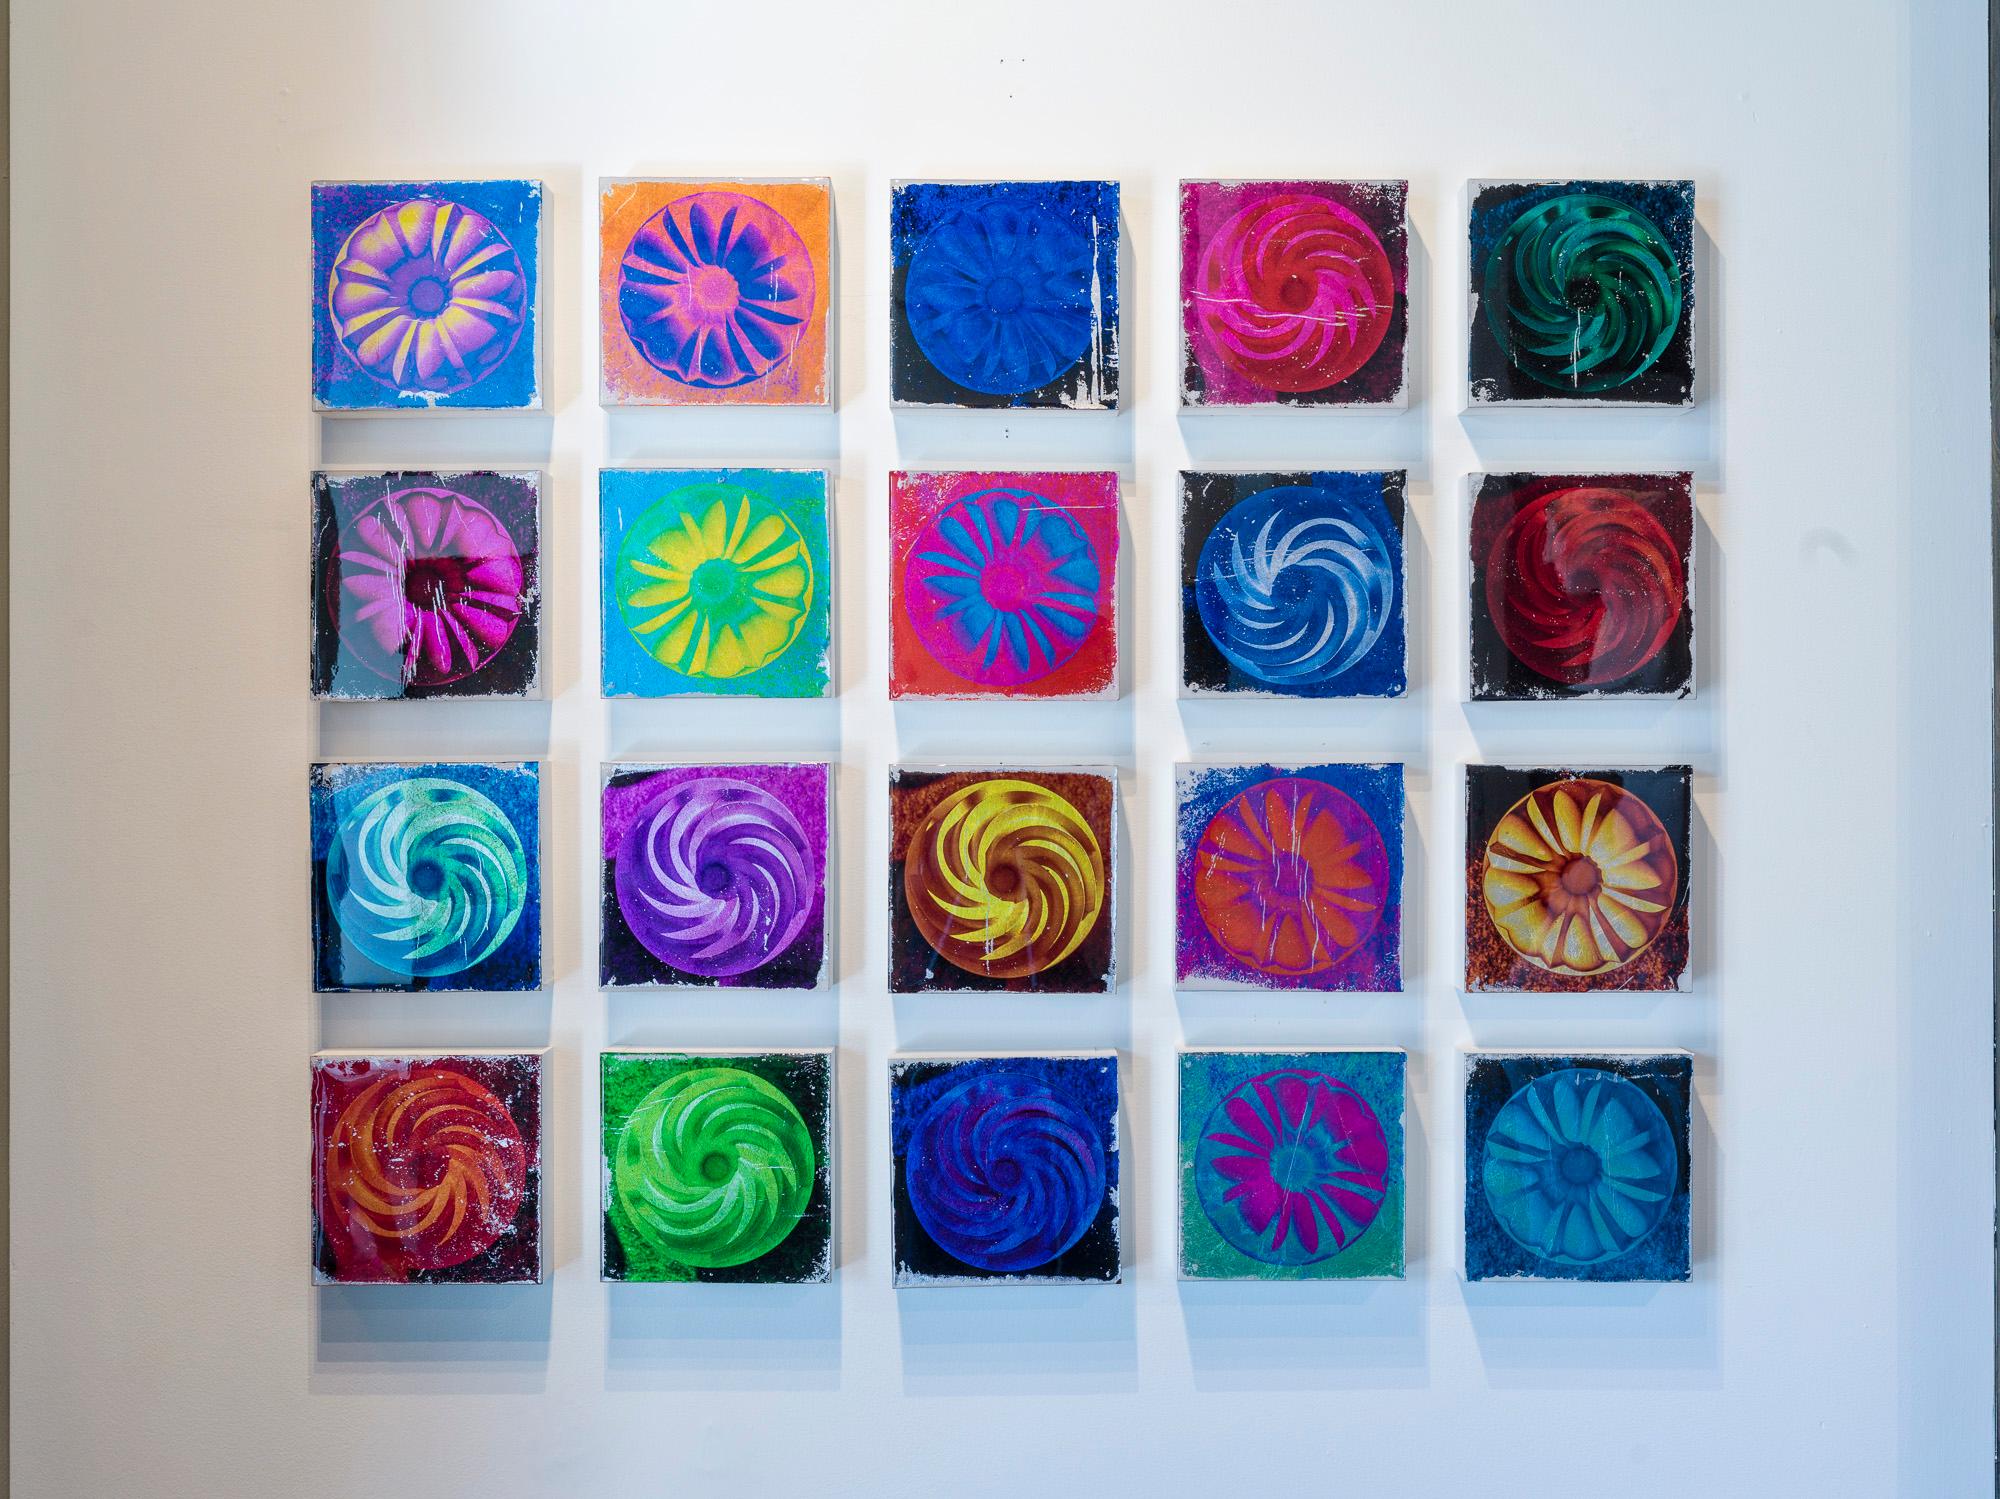 Colorful, glossy, and small original art by Mark Jackson. Each original work from the Color Wheel series is a hyper-color photograph of bundt cake sculptures Jackson sculpted out of clay and plaster. From Mark Jackson's CAKE exhibition.

Mark